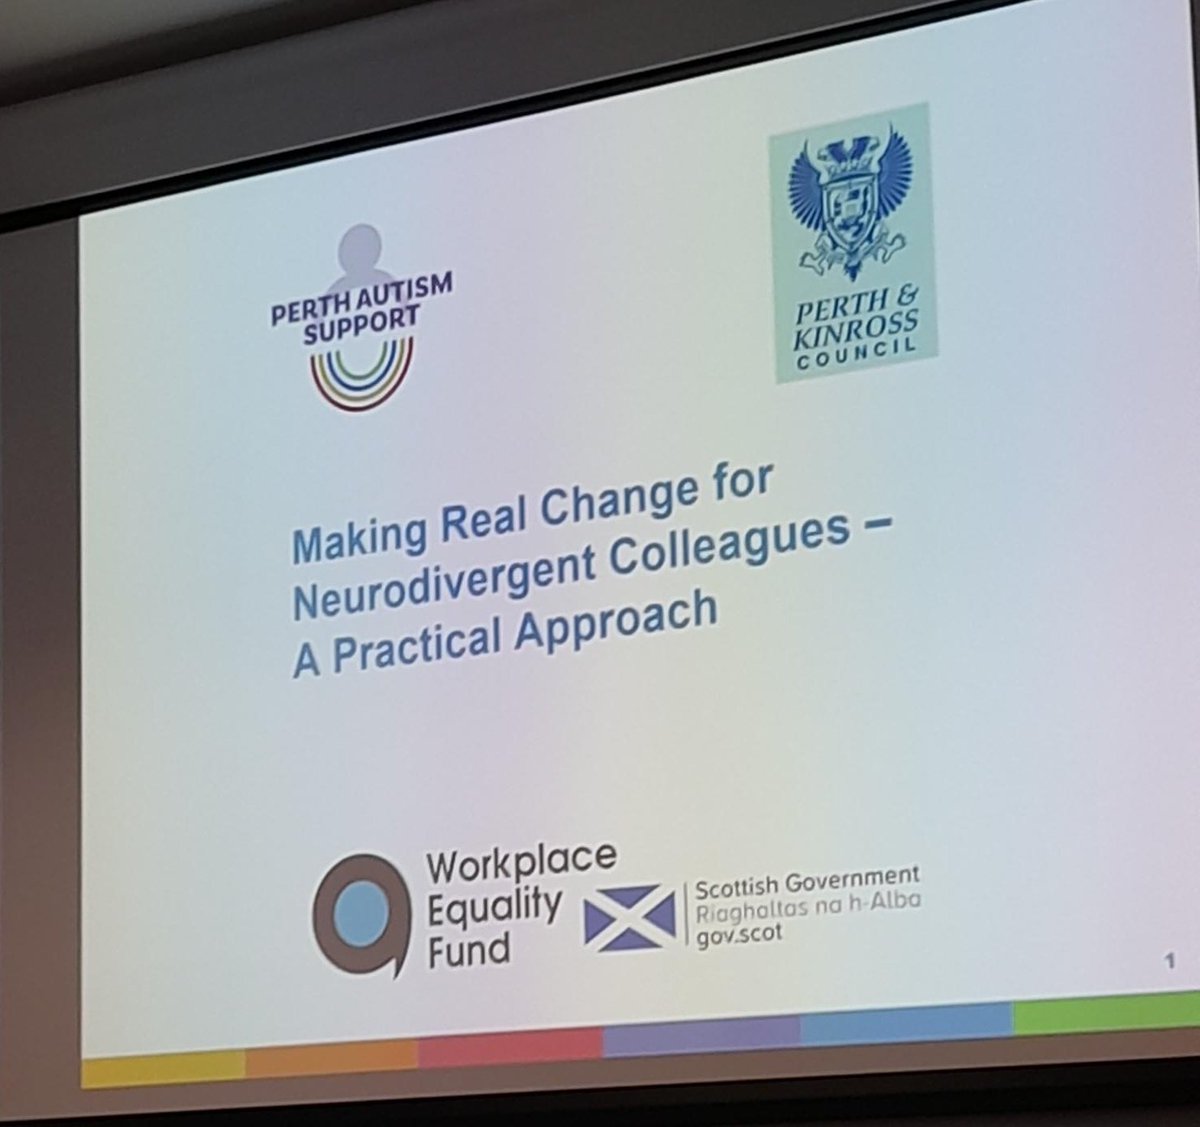 Great to hear Perth & Kinross council have a Think Yes culture when it comes to making reasonable adjustments for staff. #WEFCONF23